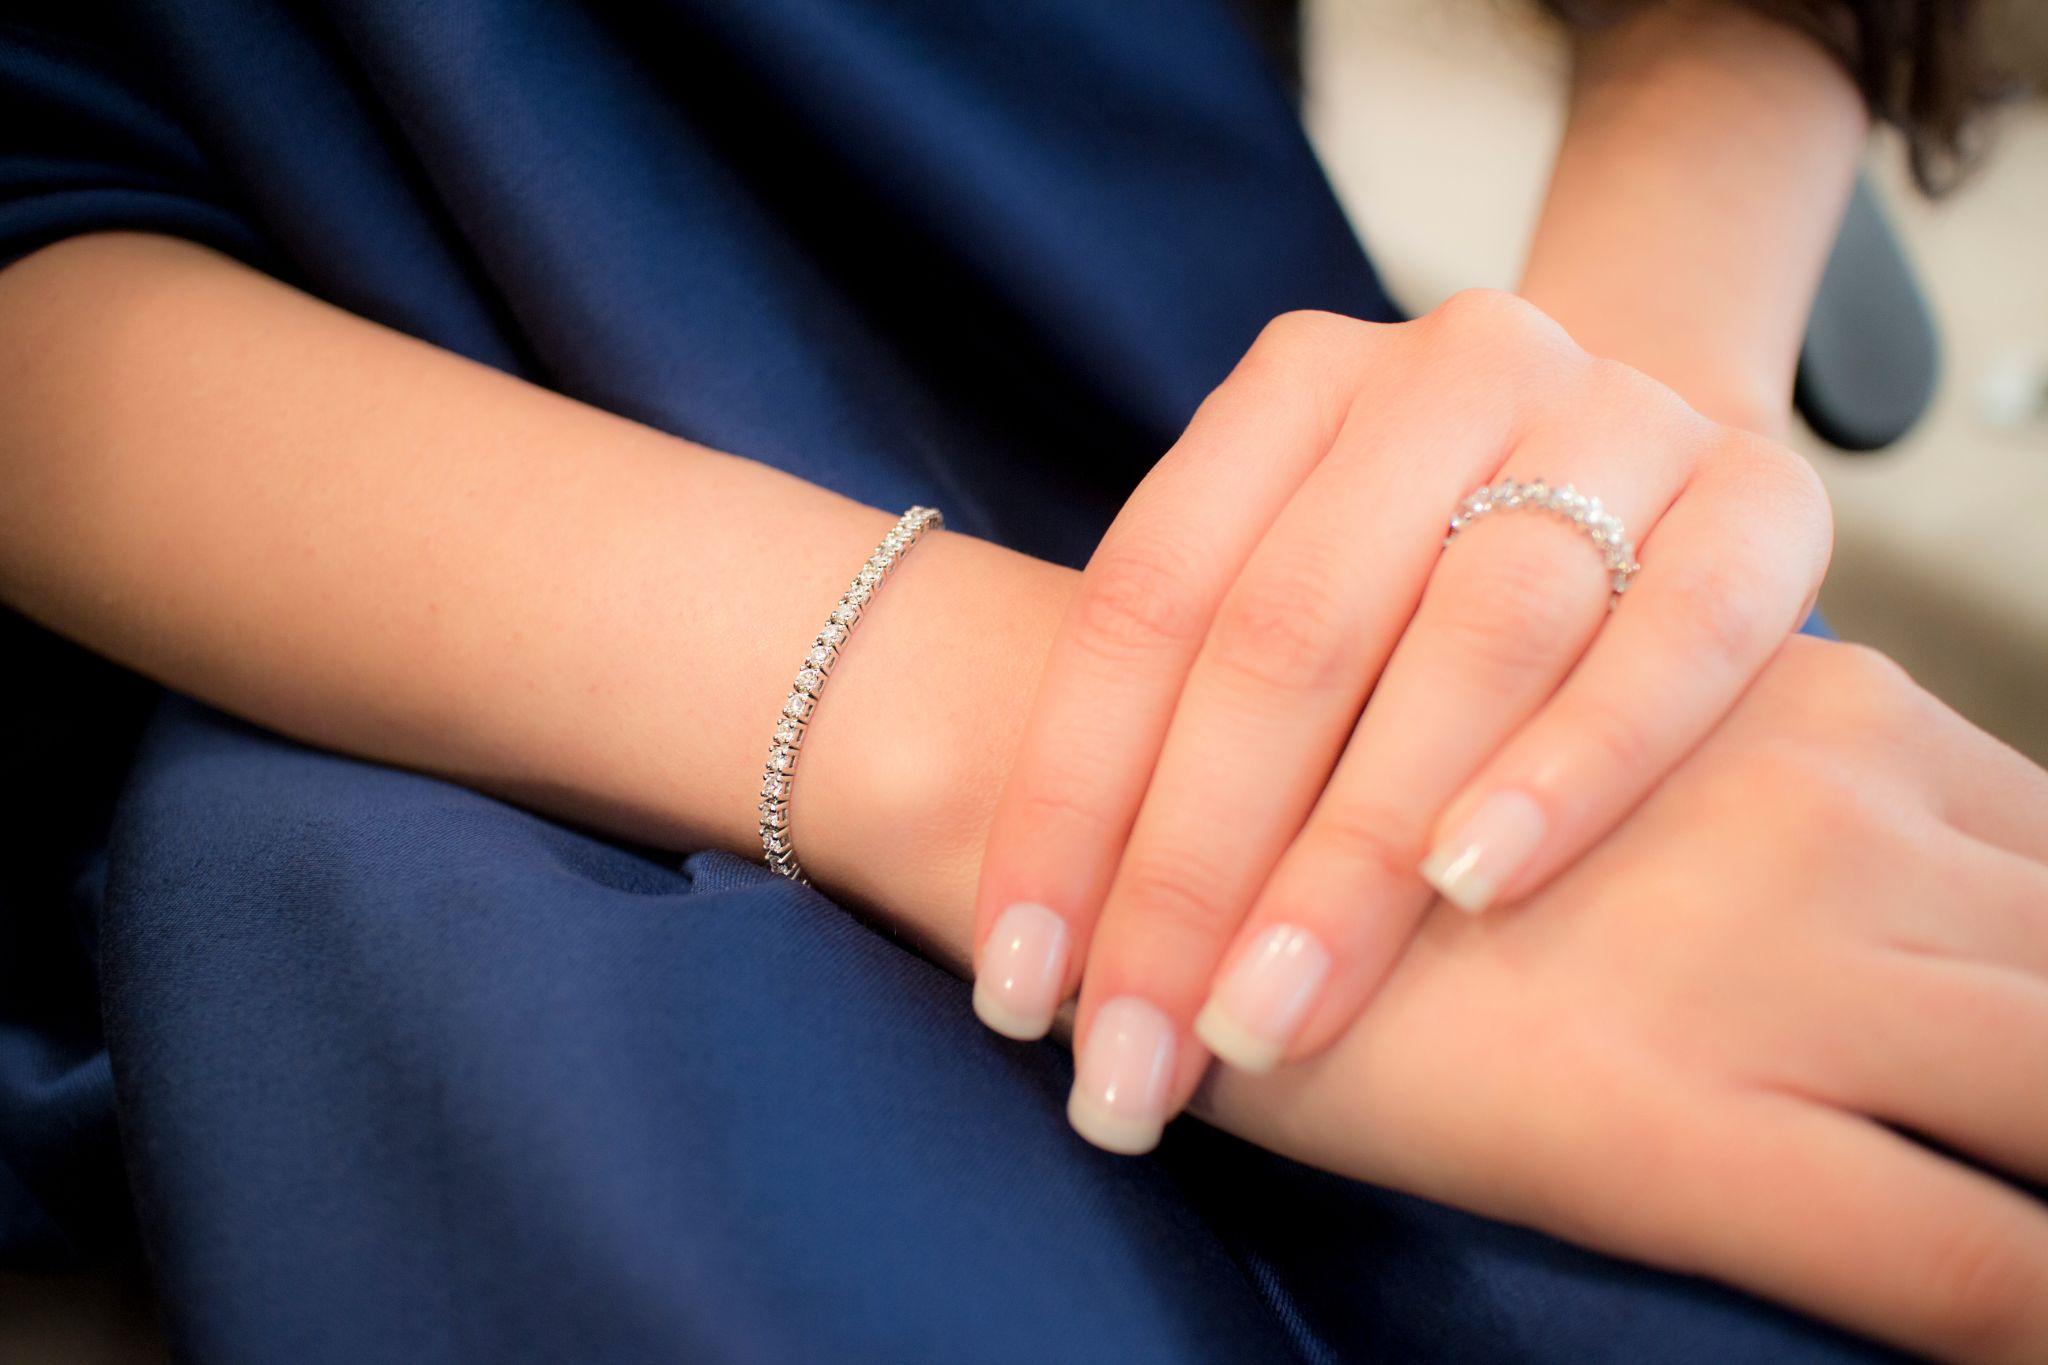 close-up of woman's hands wearing diamond bracelet and ring